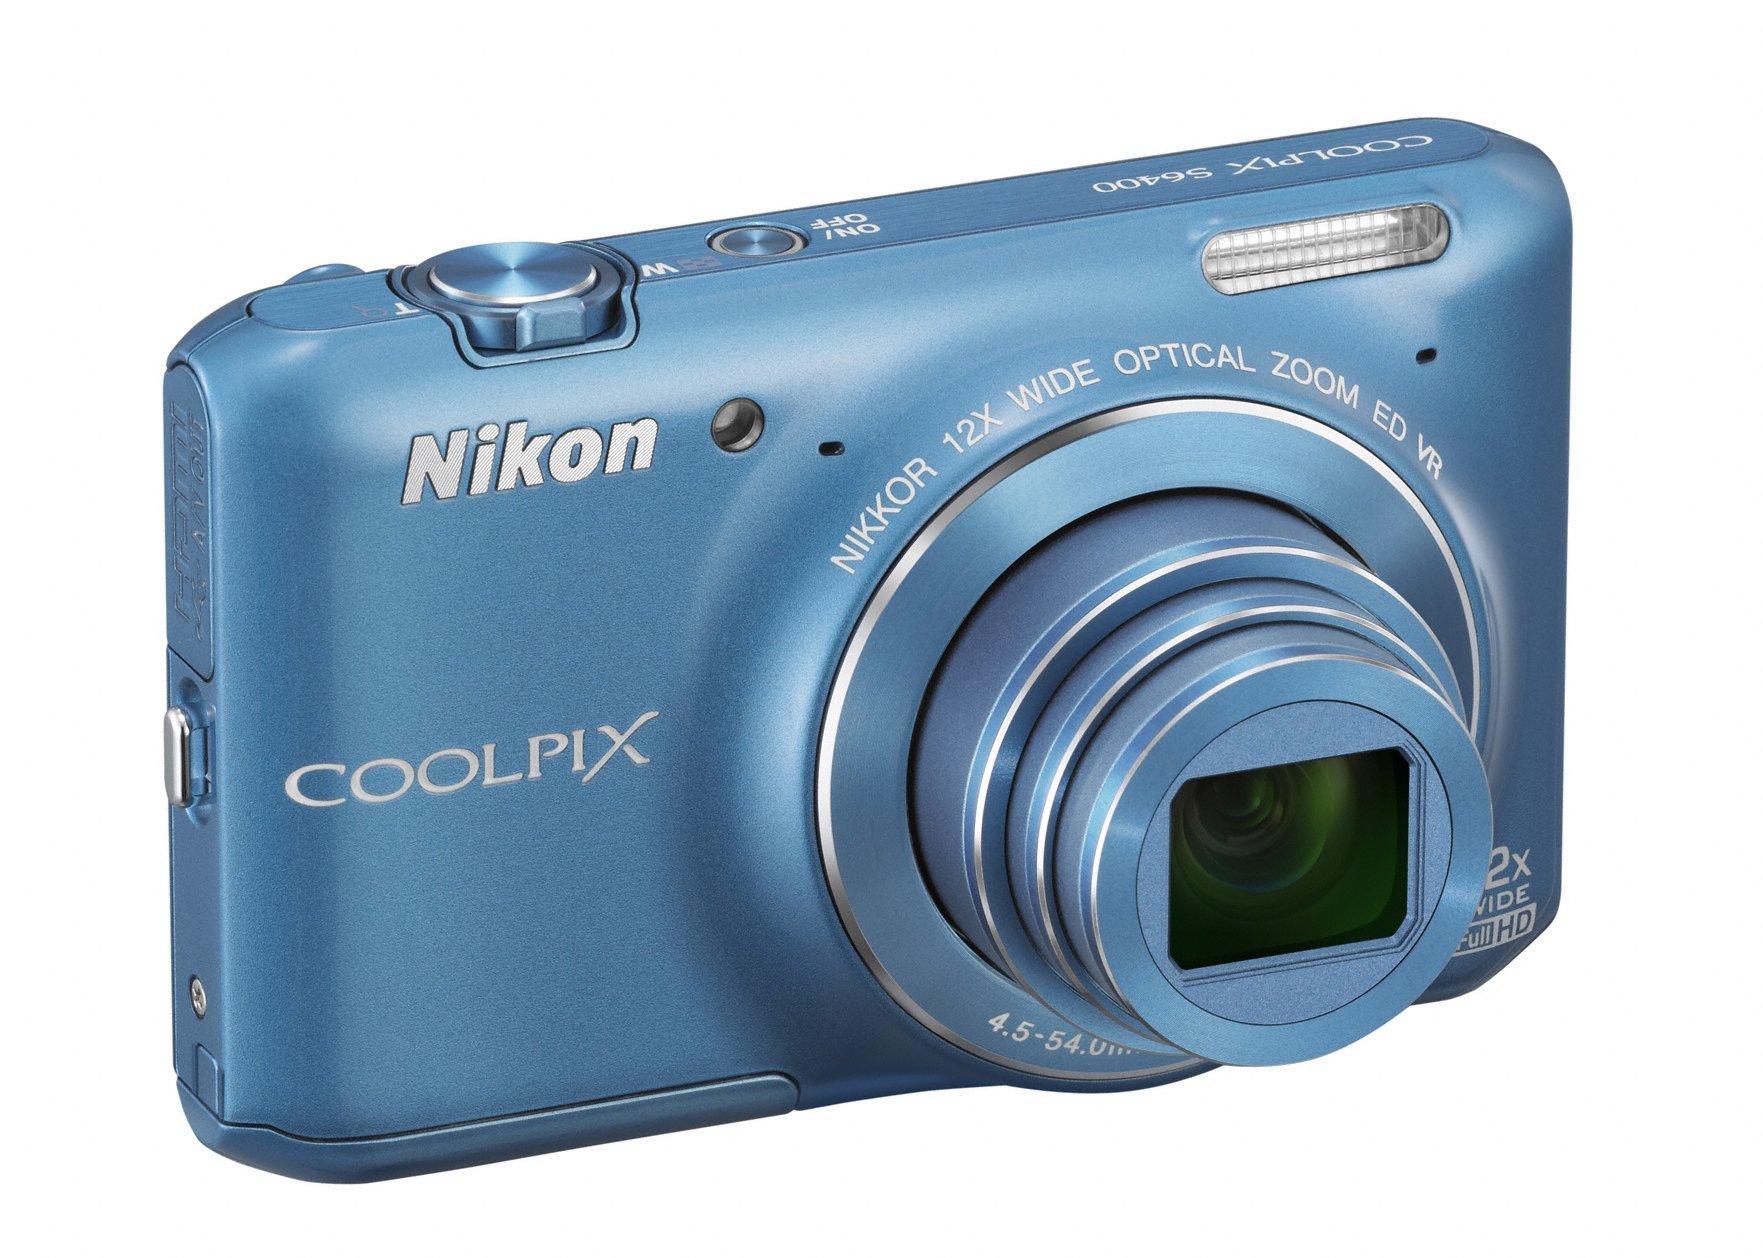 Nikon COOLPIX S6400 16 MP Digital Camera with 12x Optical Zoom and 3-inch LCD (Blue)